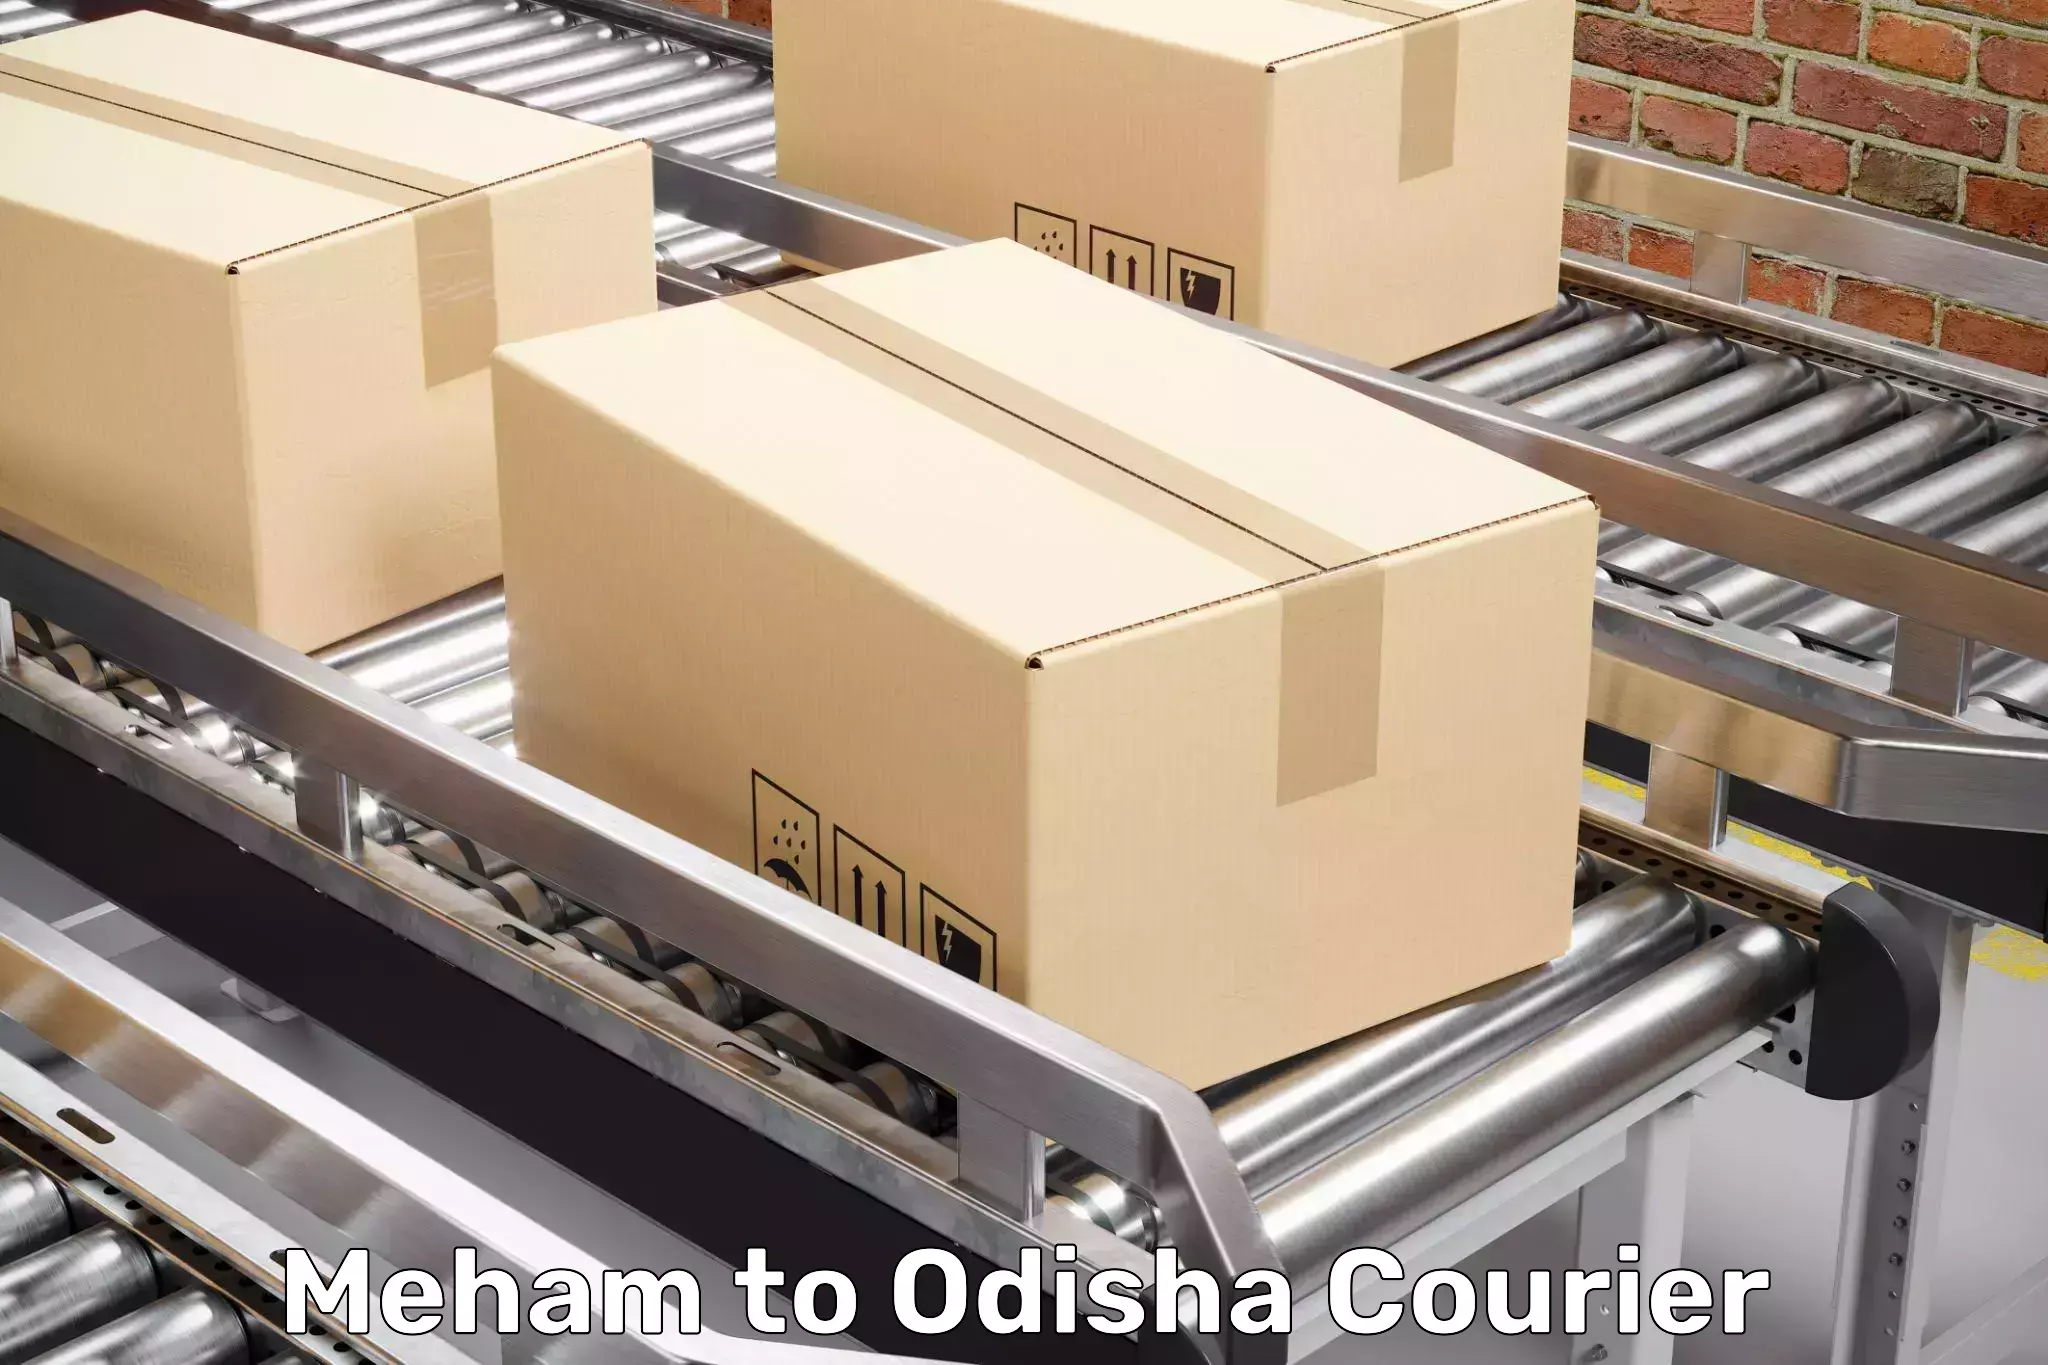 Furniture delivery service Meham to Loisingha